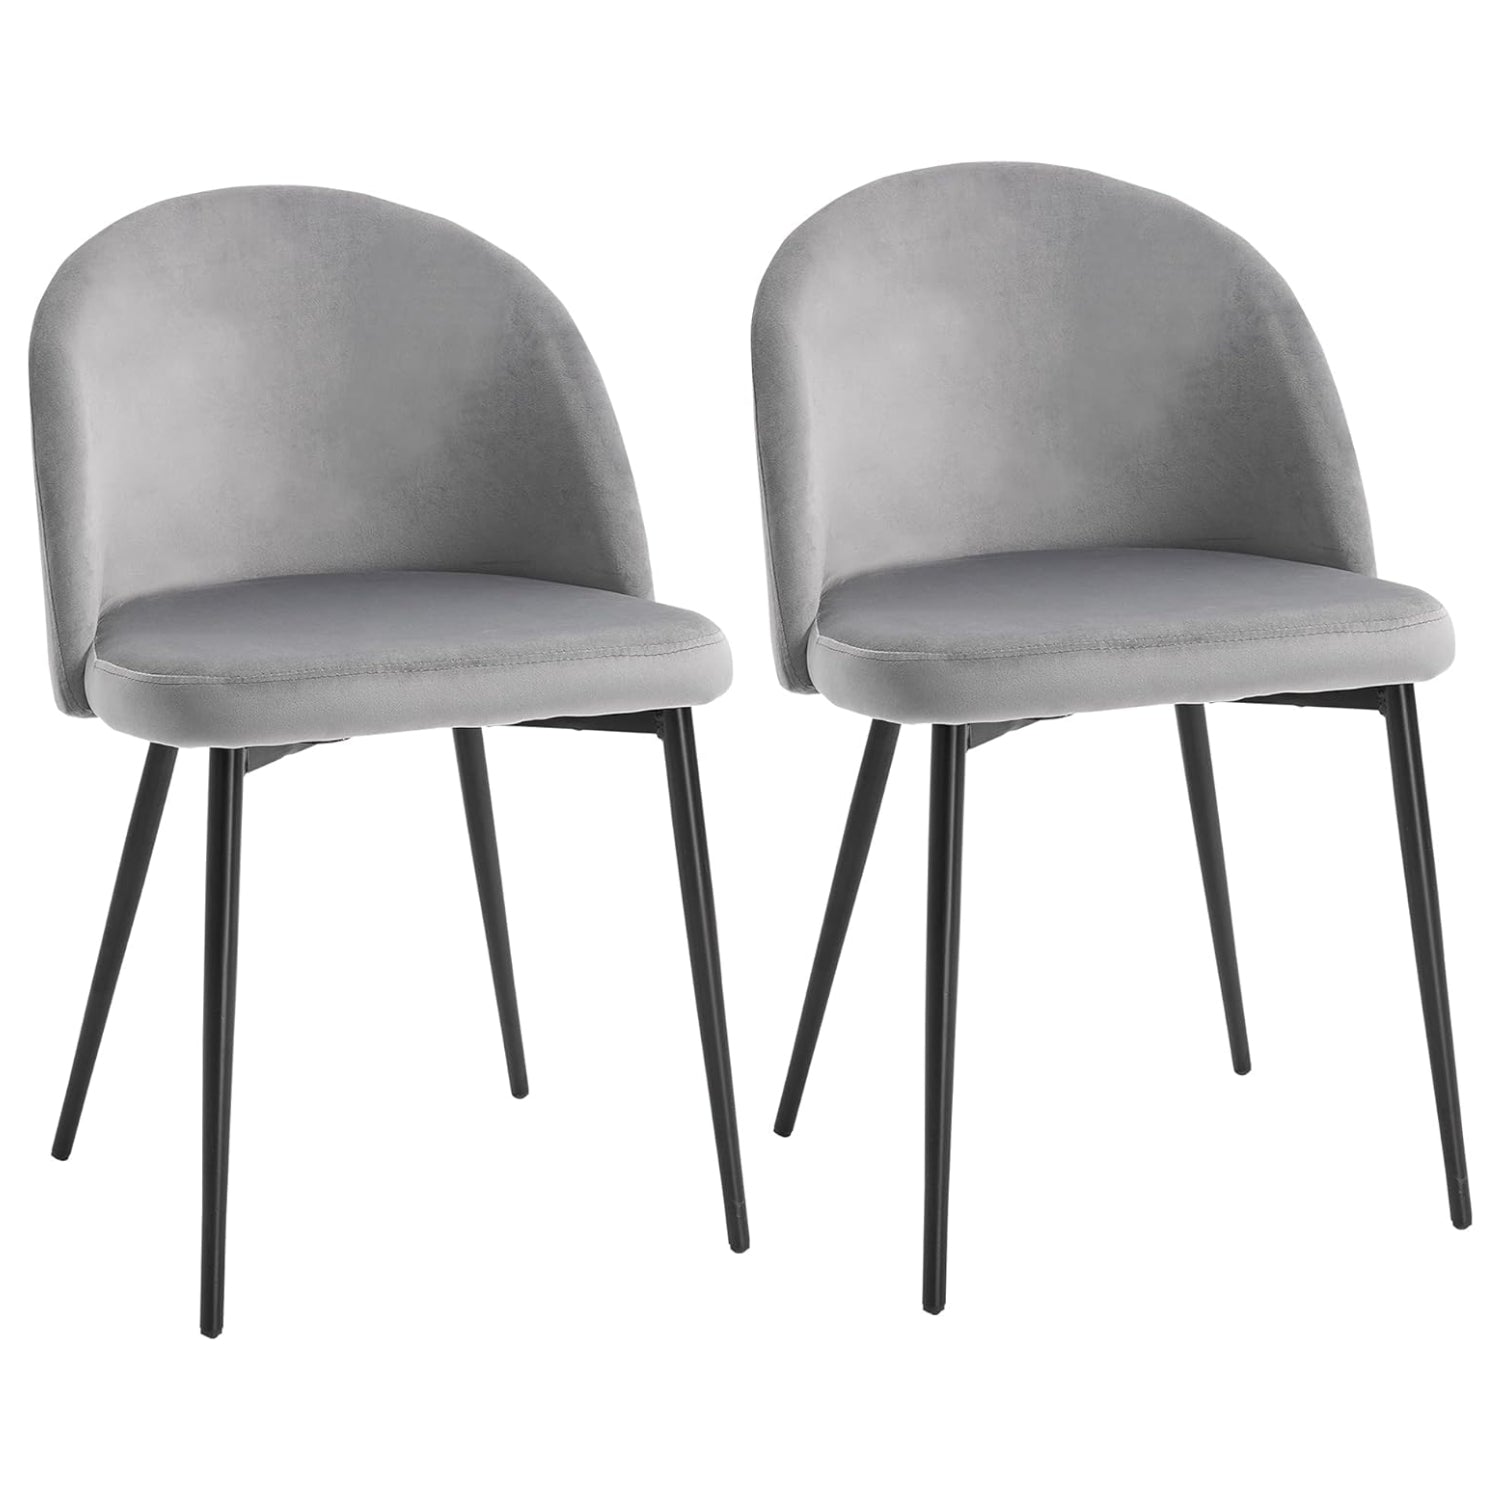 Two modern grey velvet dining chairs placed together with a table in the center.